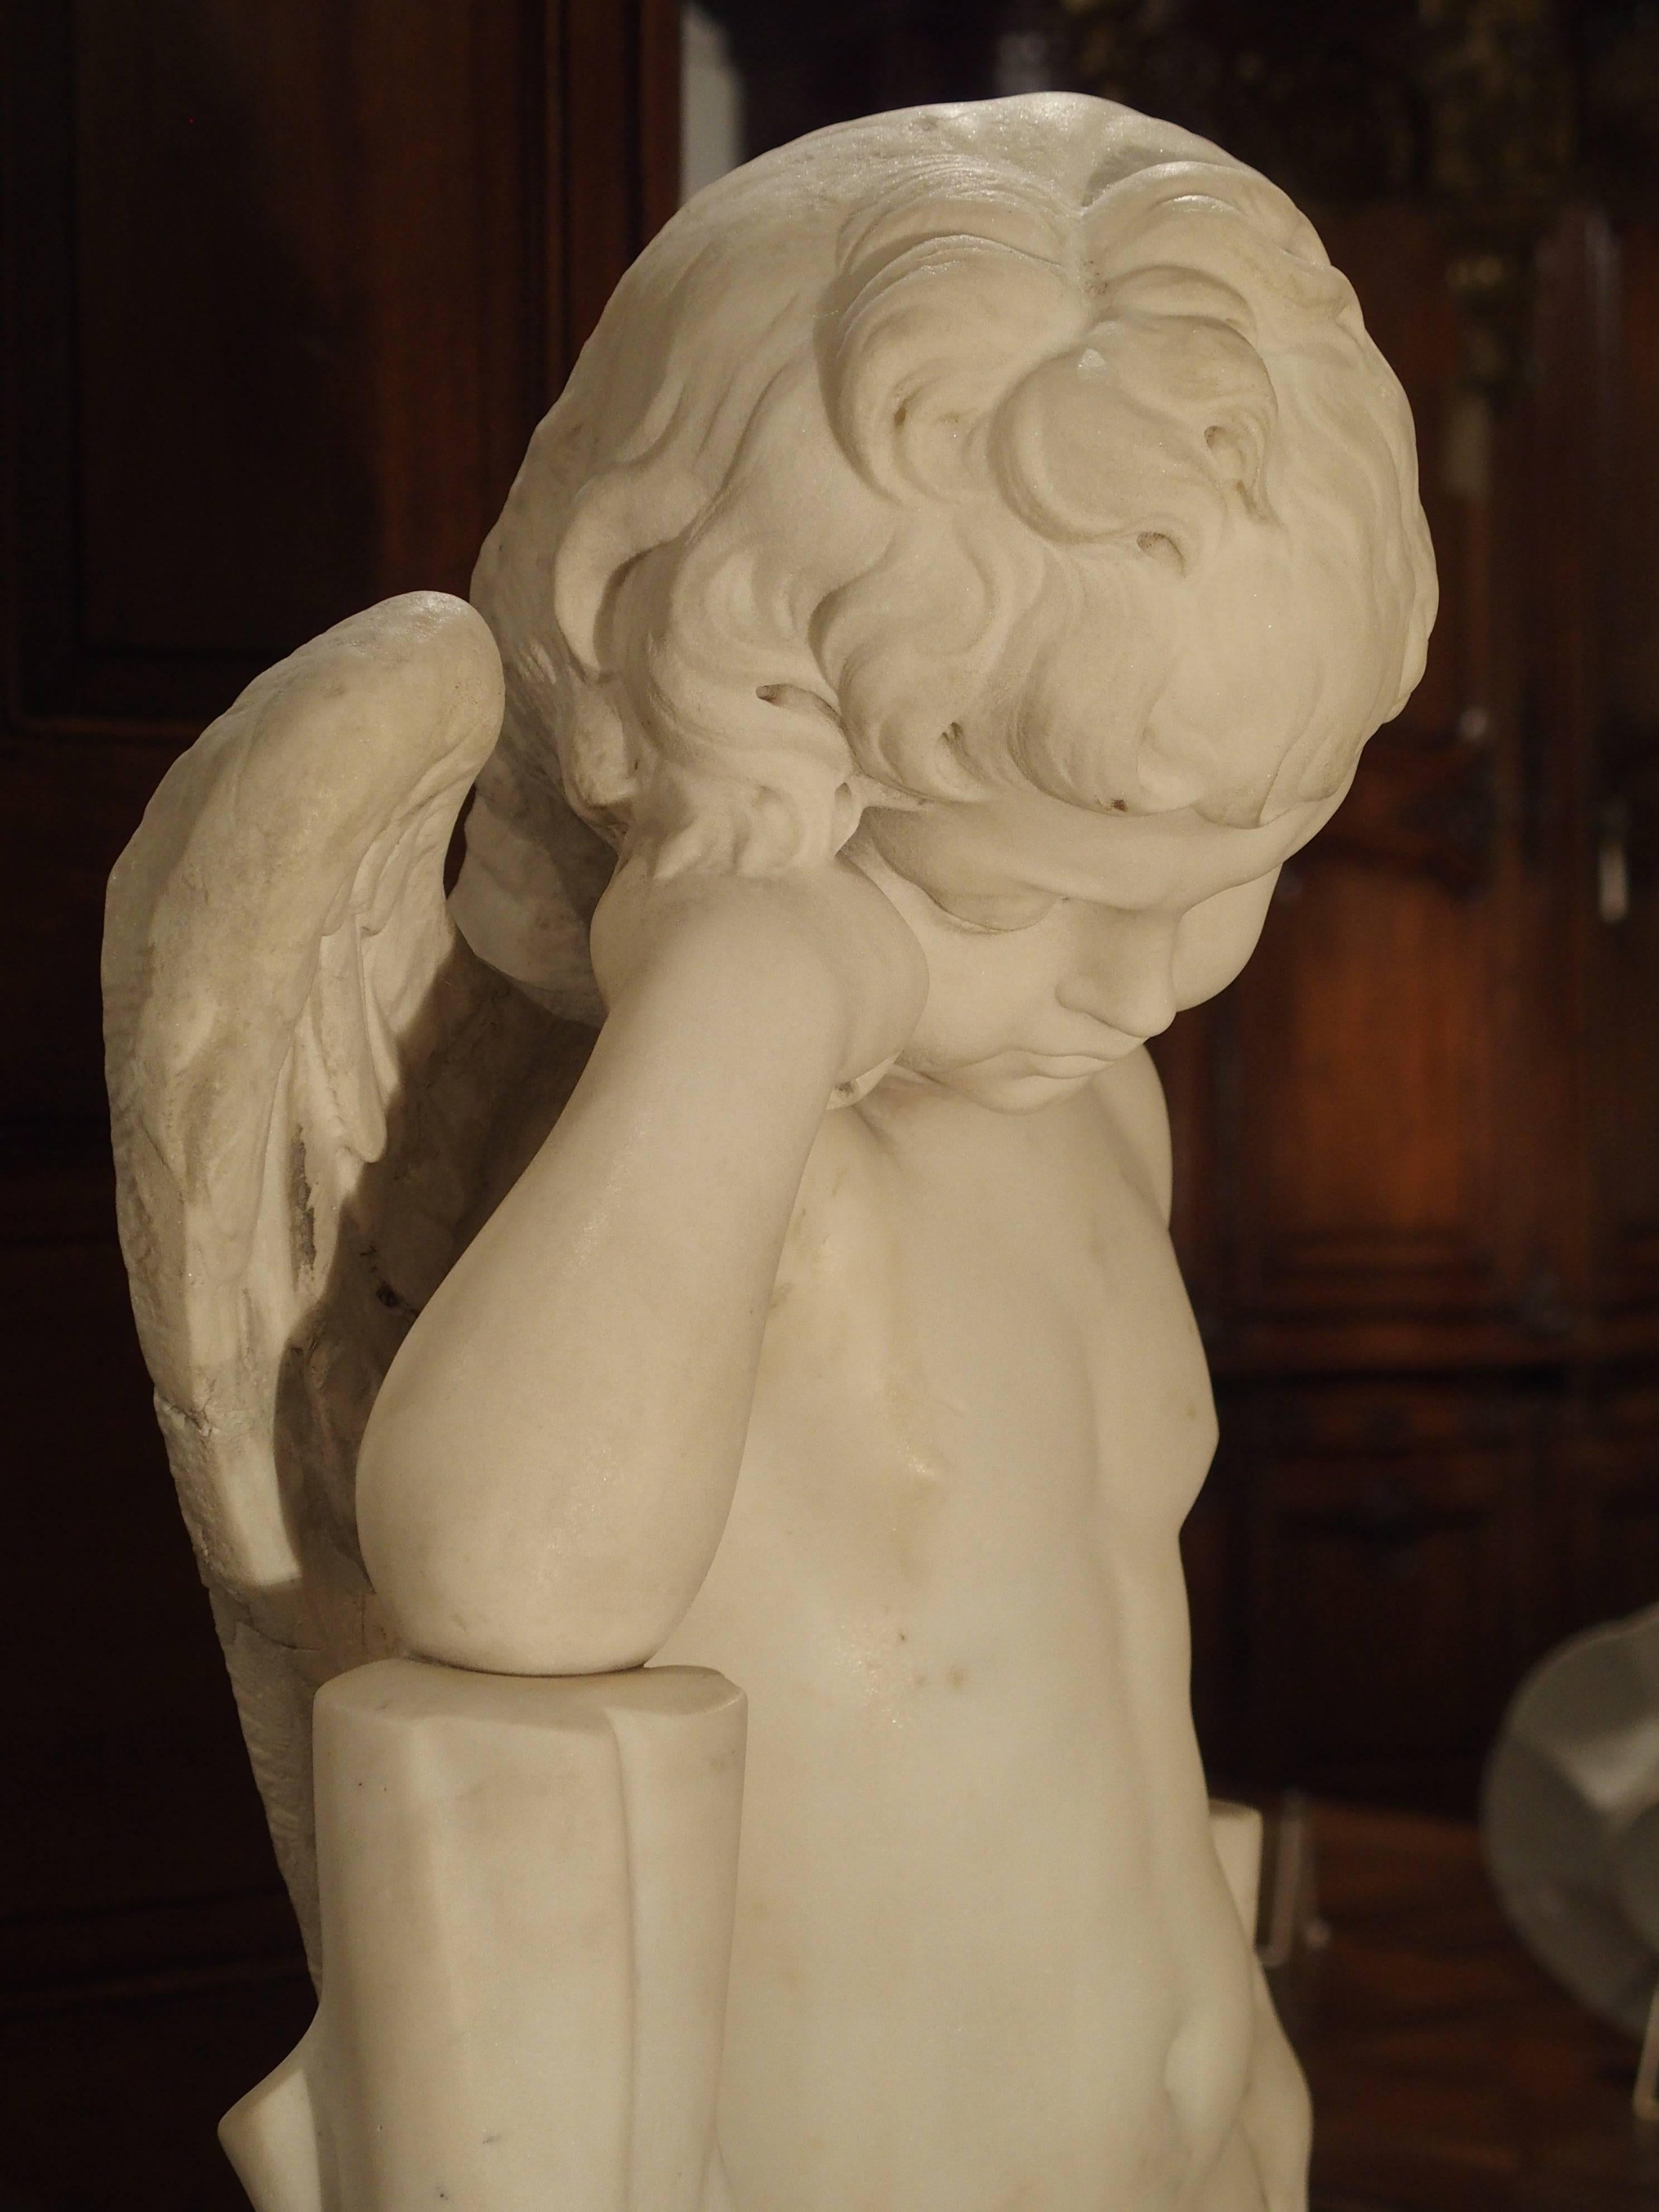 Hand-Carved Antique Italian Marble Statue of a Cherub, 19th Century